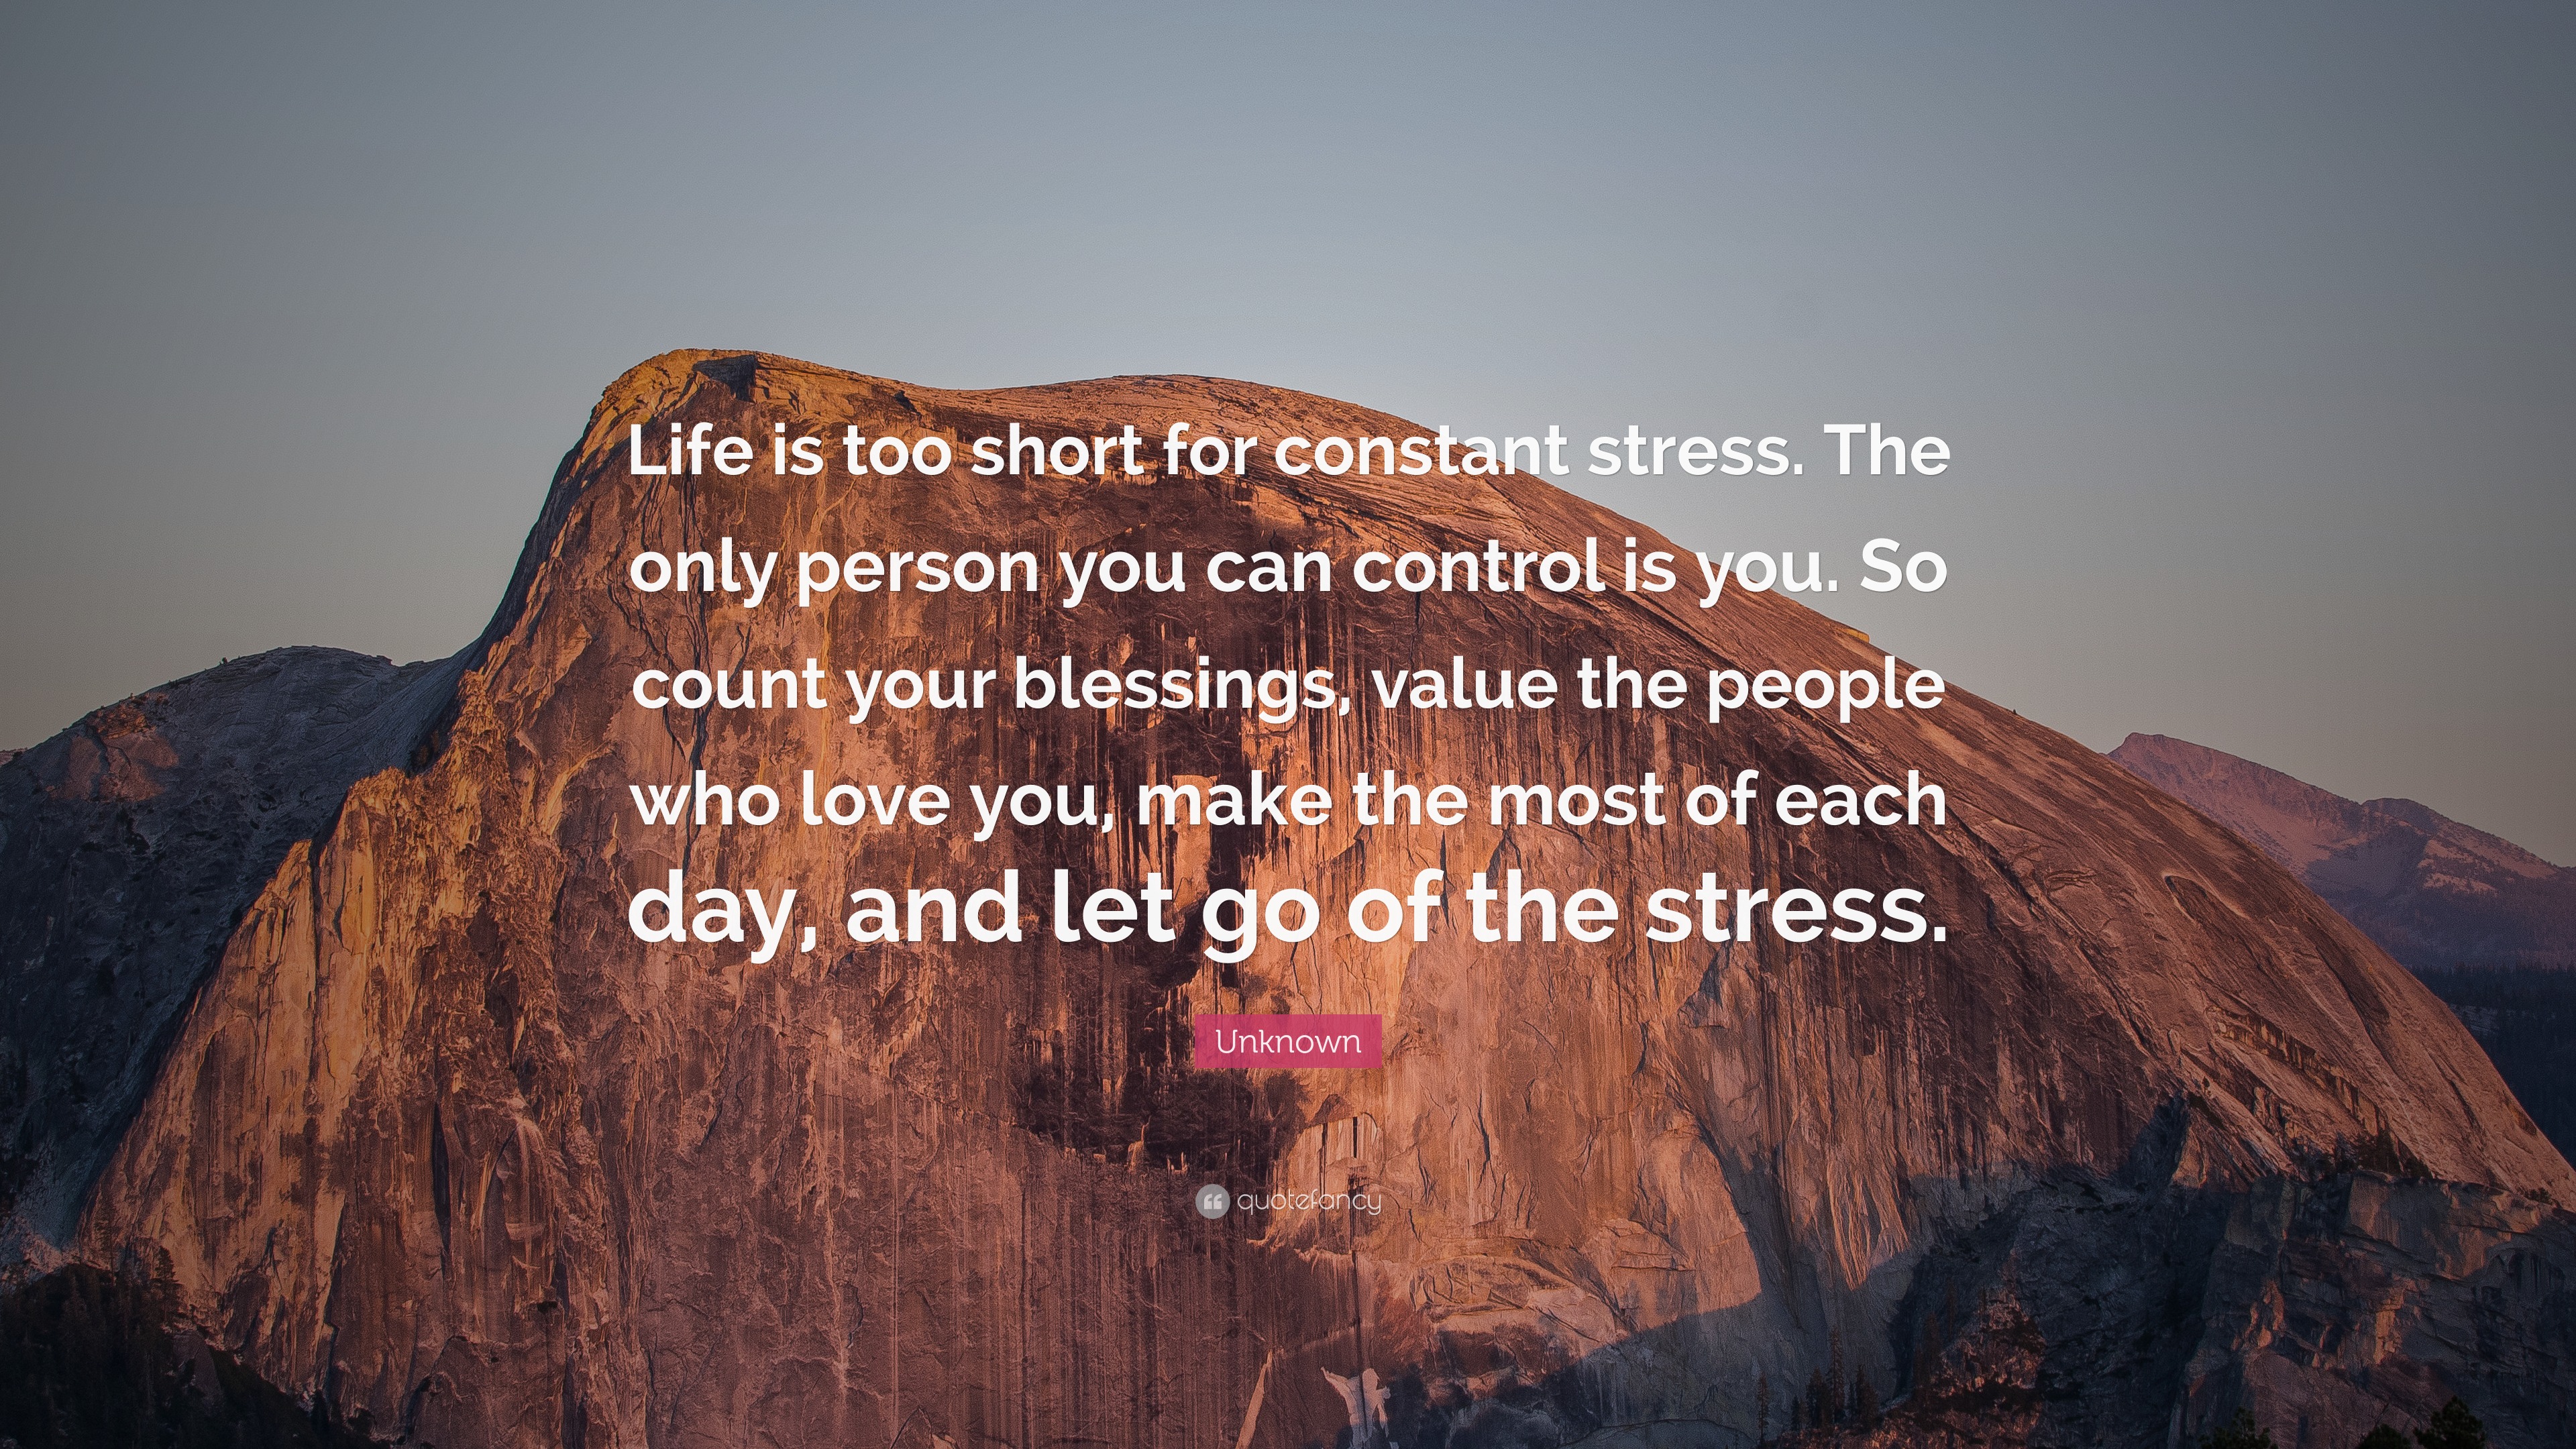 Unknown Quote: “Life is too short for constant stress. The only